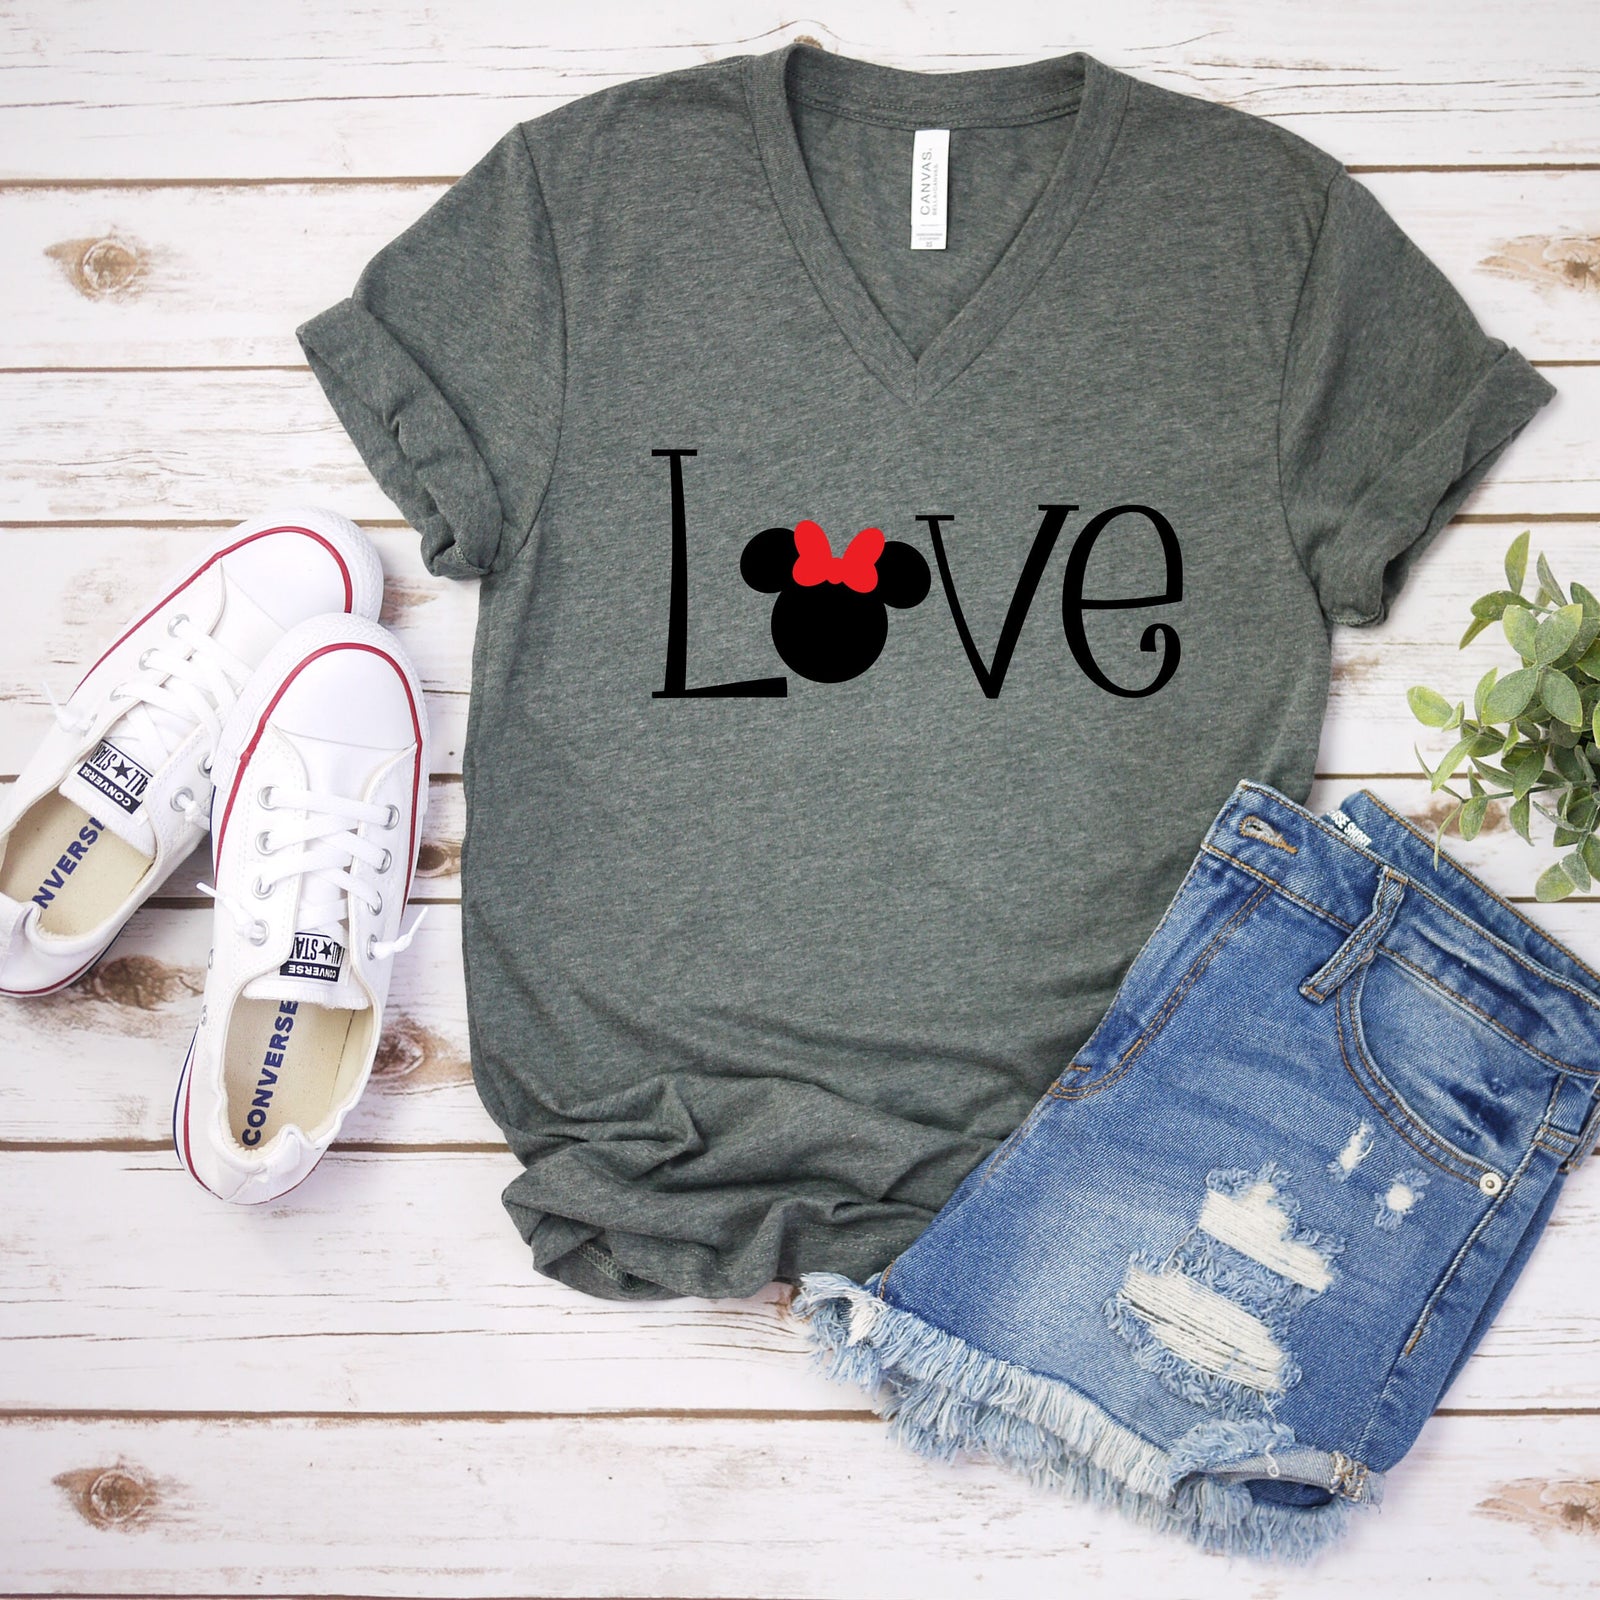 Minnie Mouse Love t shirt - Disney Trip Matching Shirts - Minnie Mouse Valentines Day